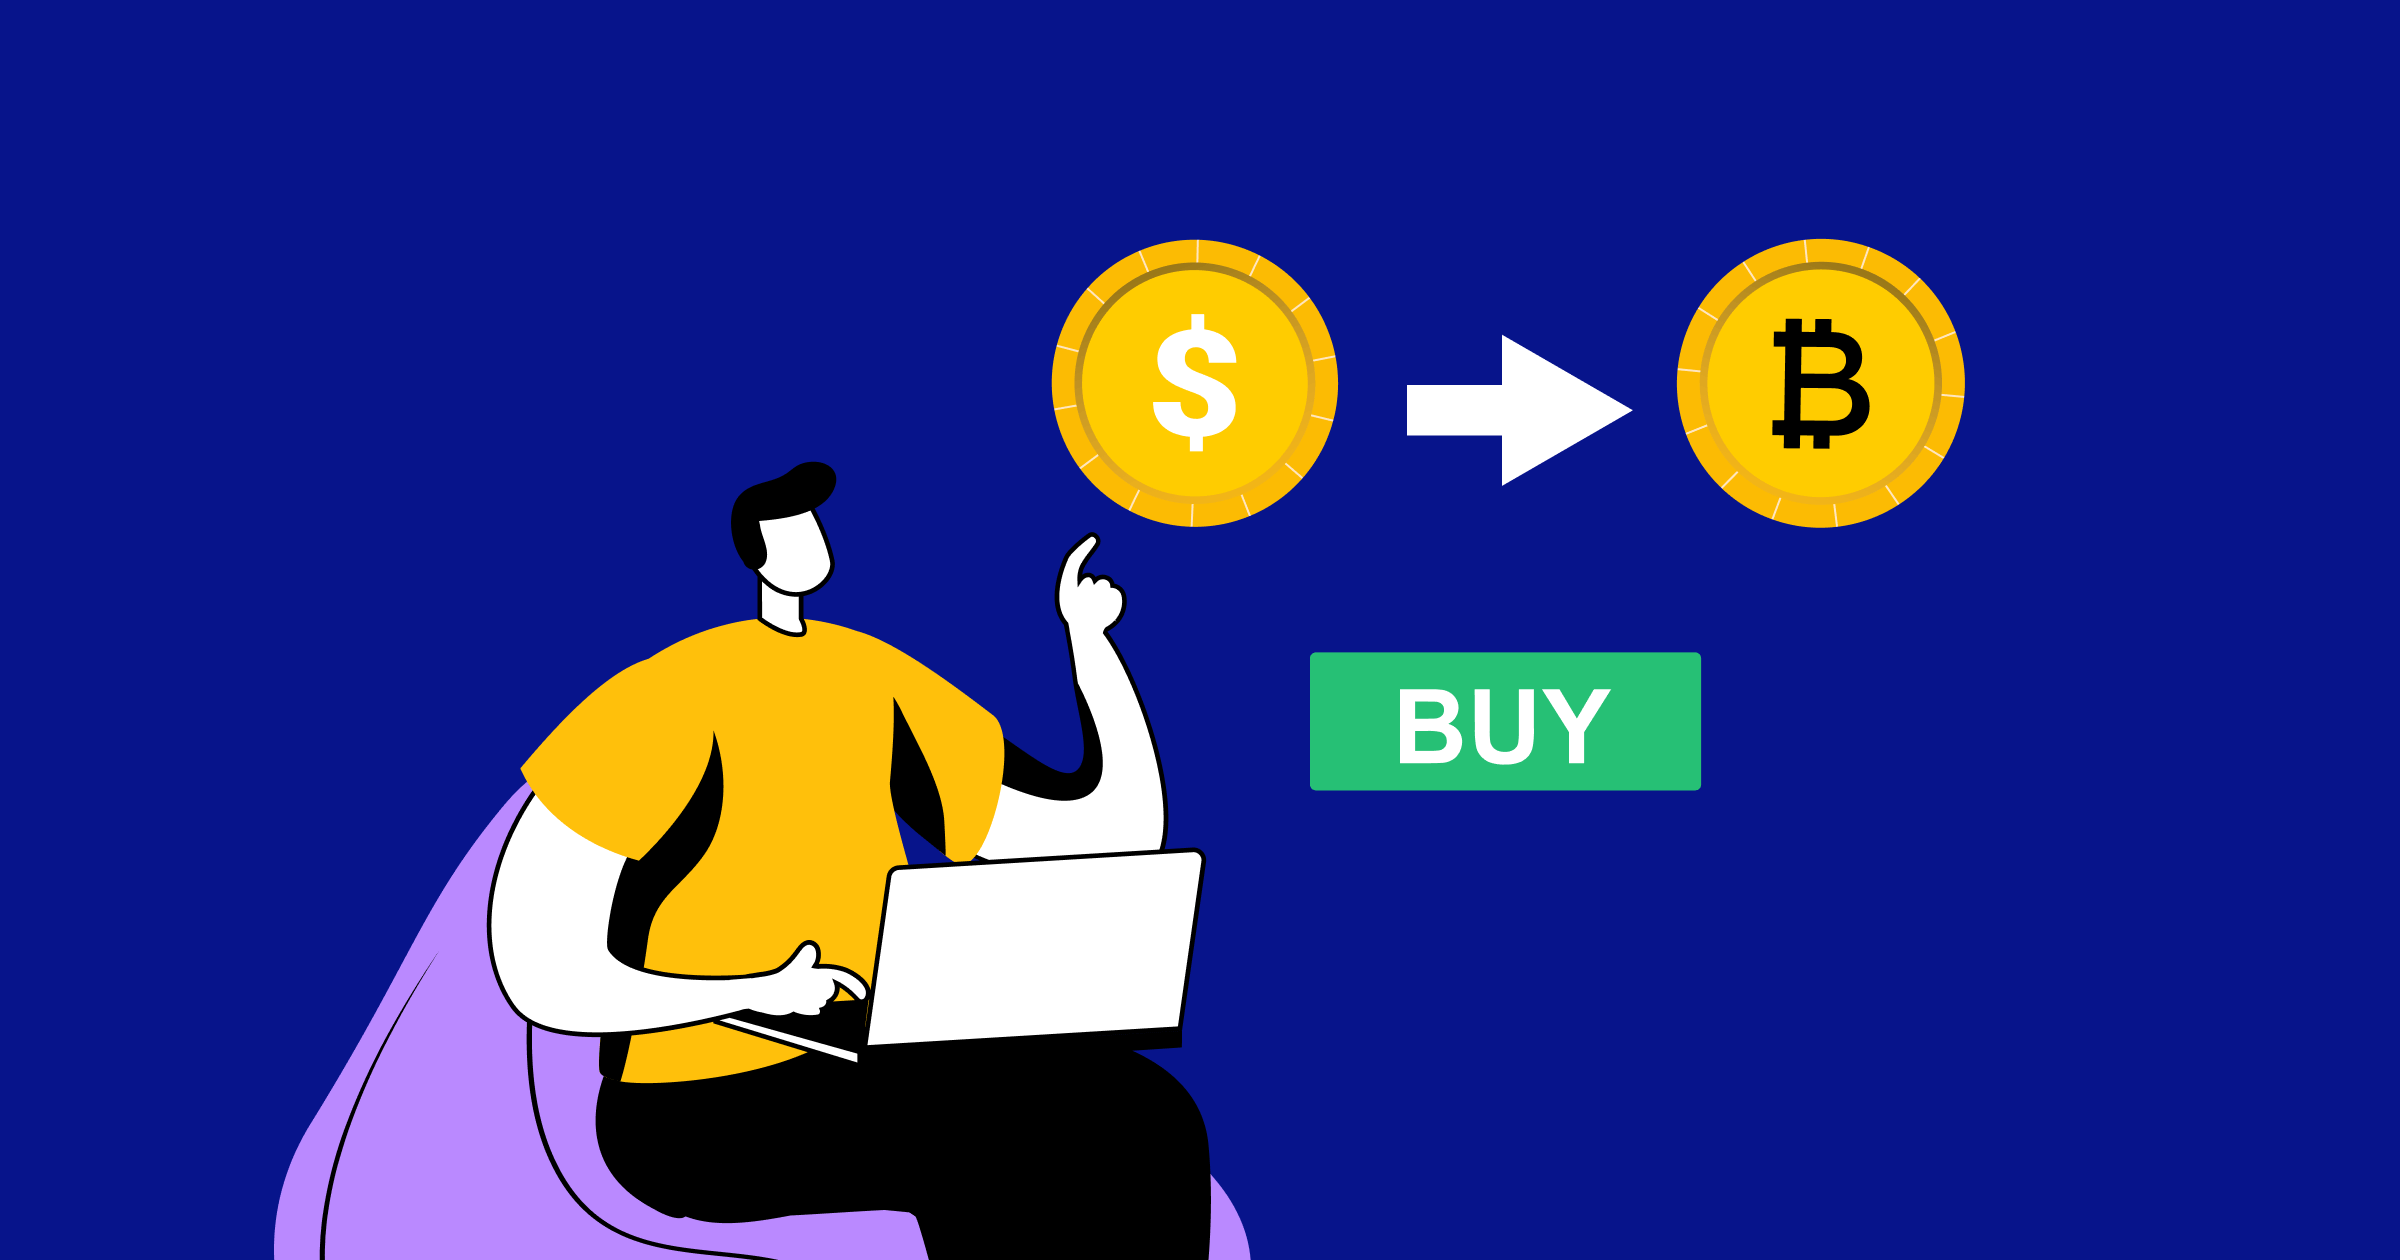 What Is the Best Time to Buy Cryptocurrencies? Here’s When to Do